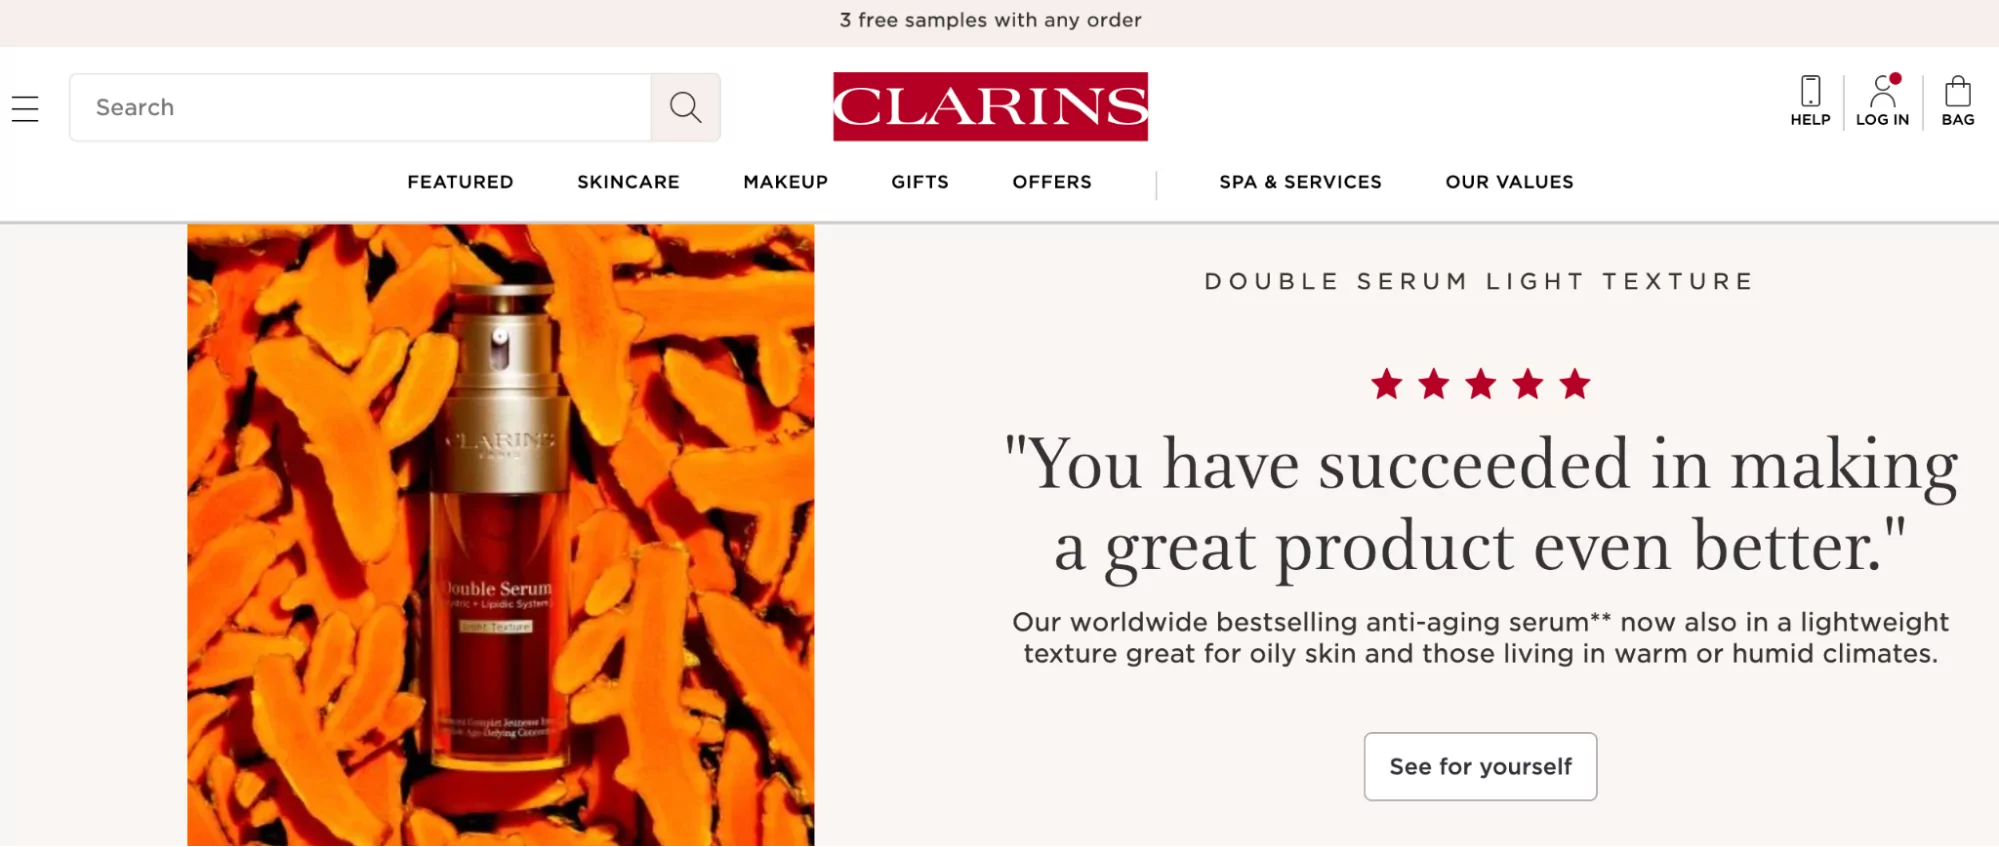 Clarins home page puts ratings and reviews front and center to add credibility and drive conversions.